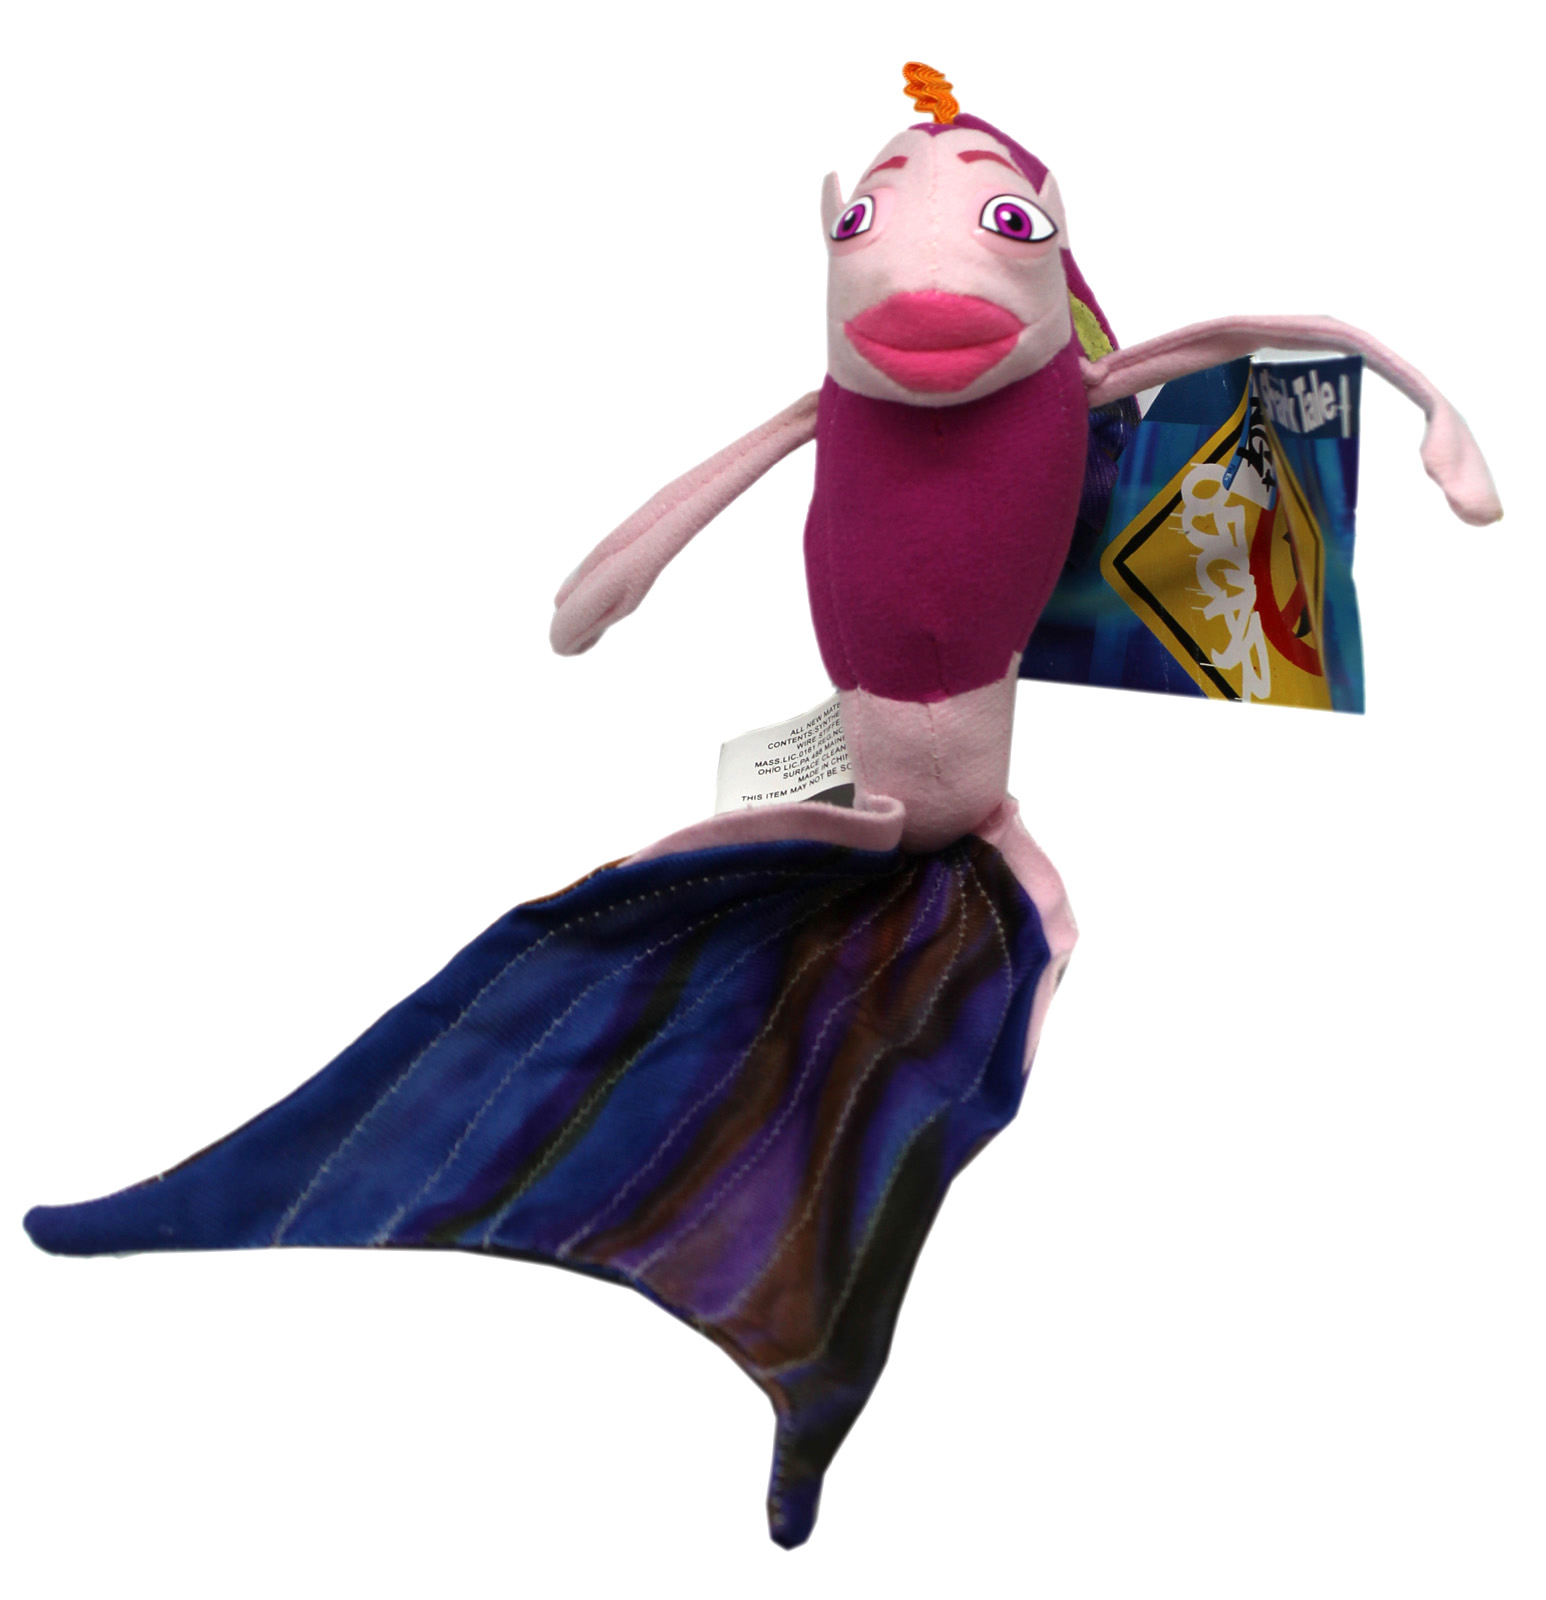 Angie from shark tale